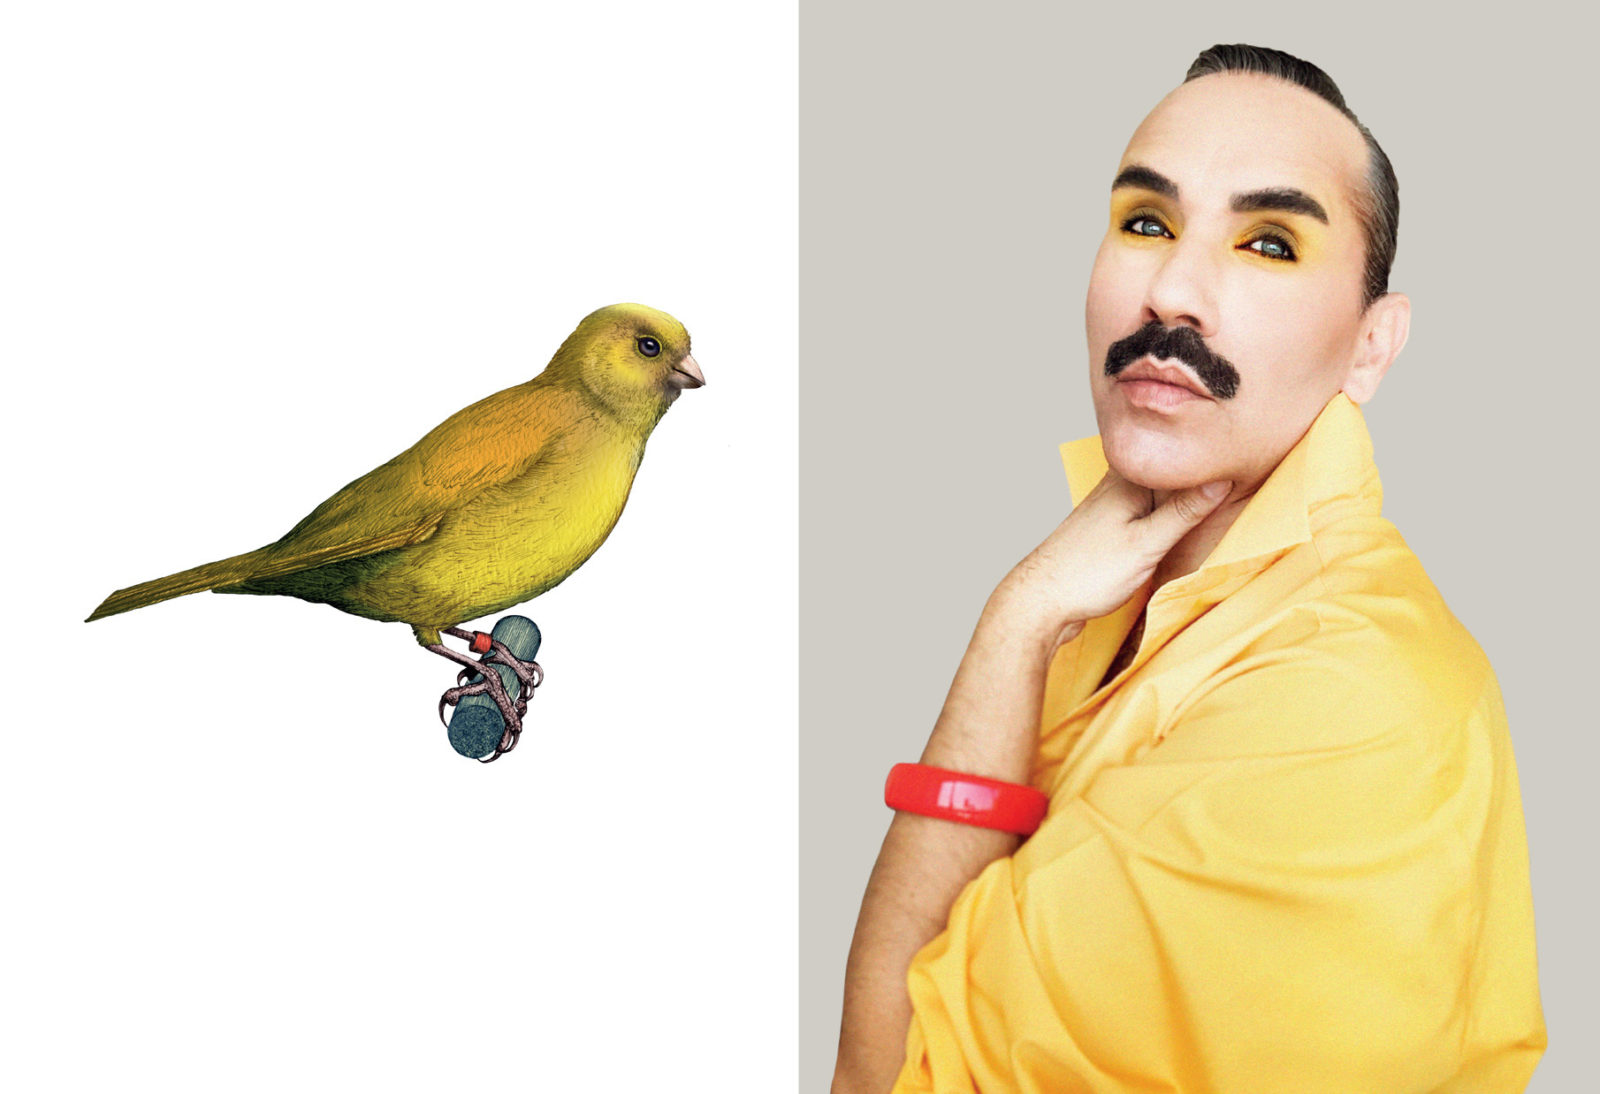 Paul Harfleet is photographed dressed up as a Canary, he has a yellow shirt on with the collar folded up, yellow eyeshadow and a red bangle on his wrist. Next to him is a detailed illustration of a canary.